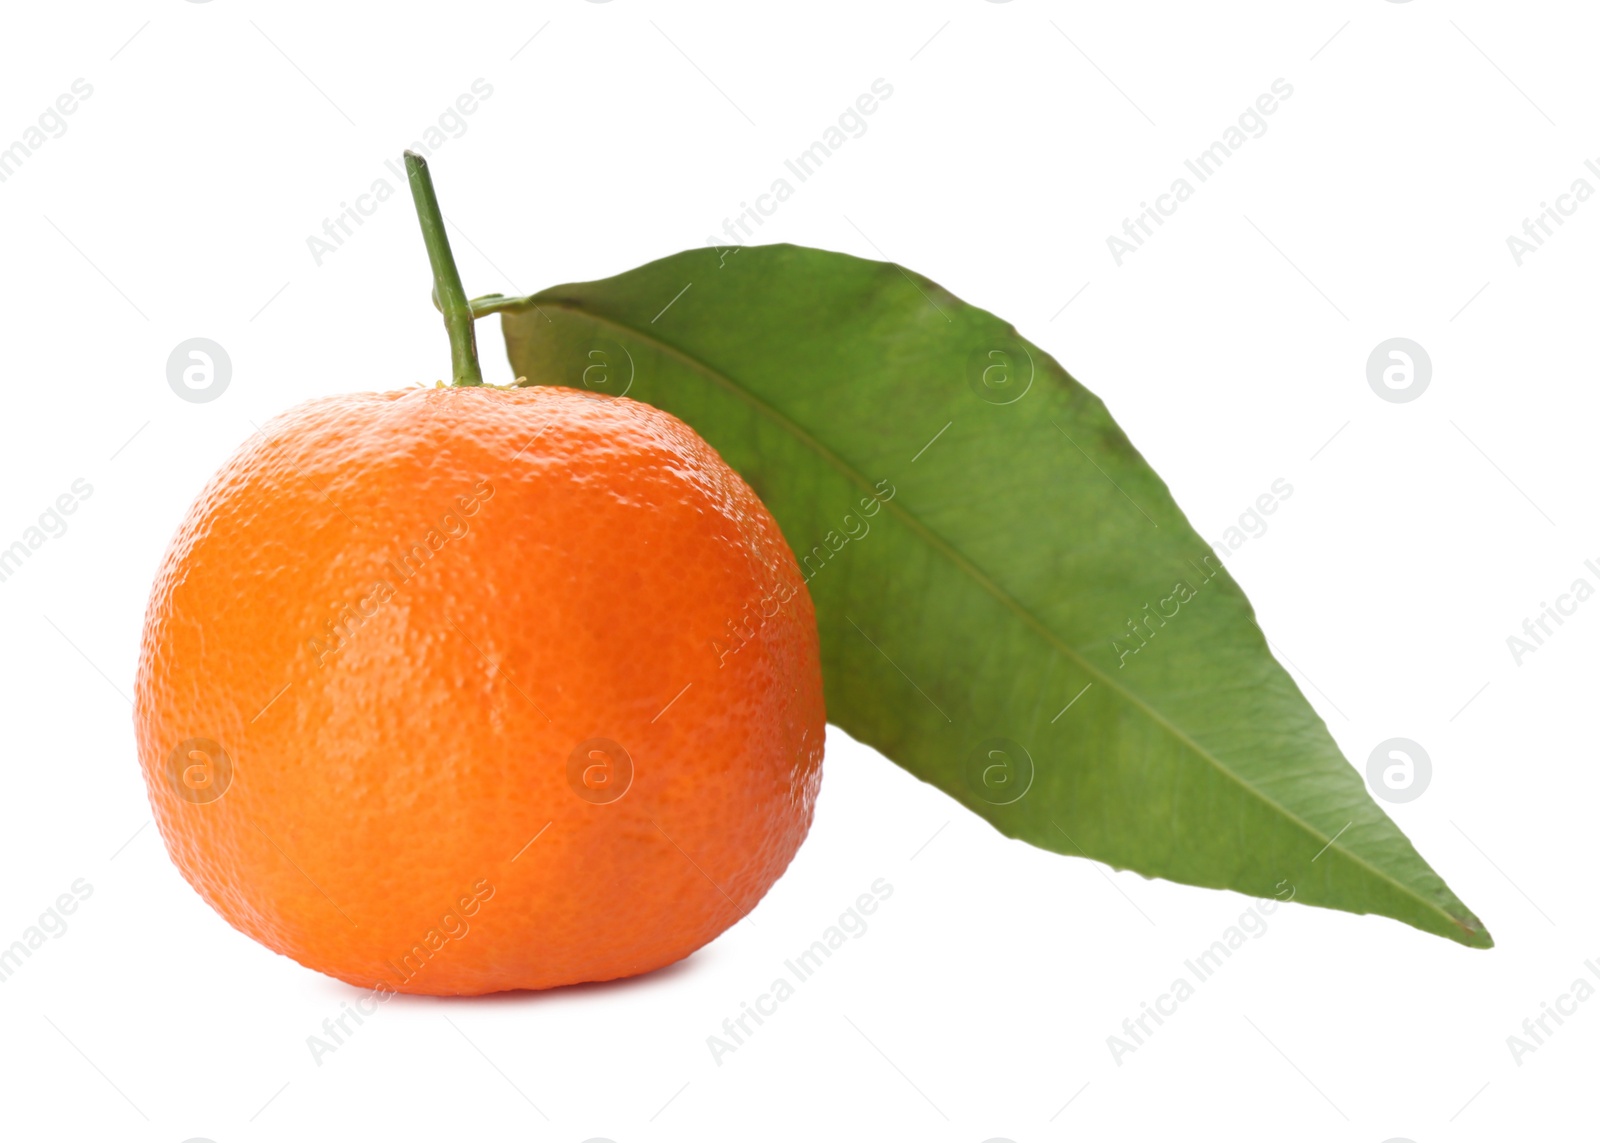 Photo of Whole fresh tangerine with green leaf isolated on white